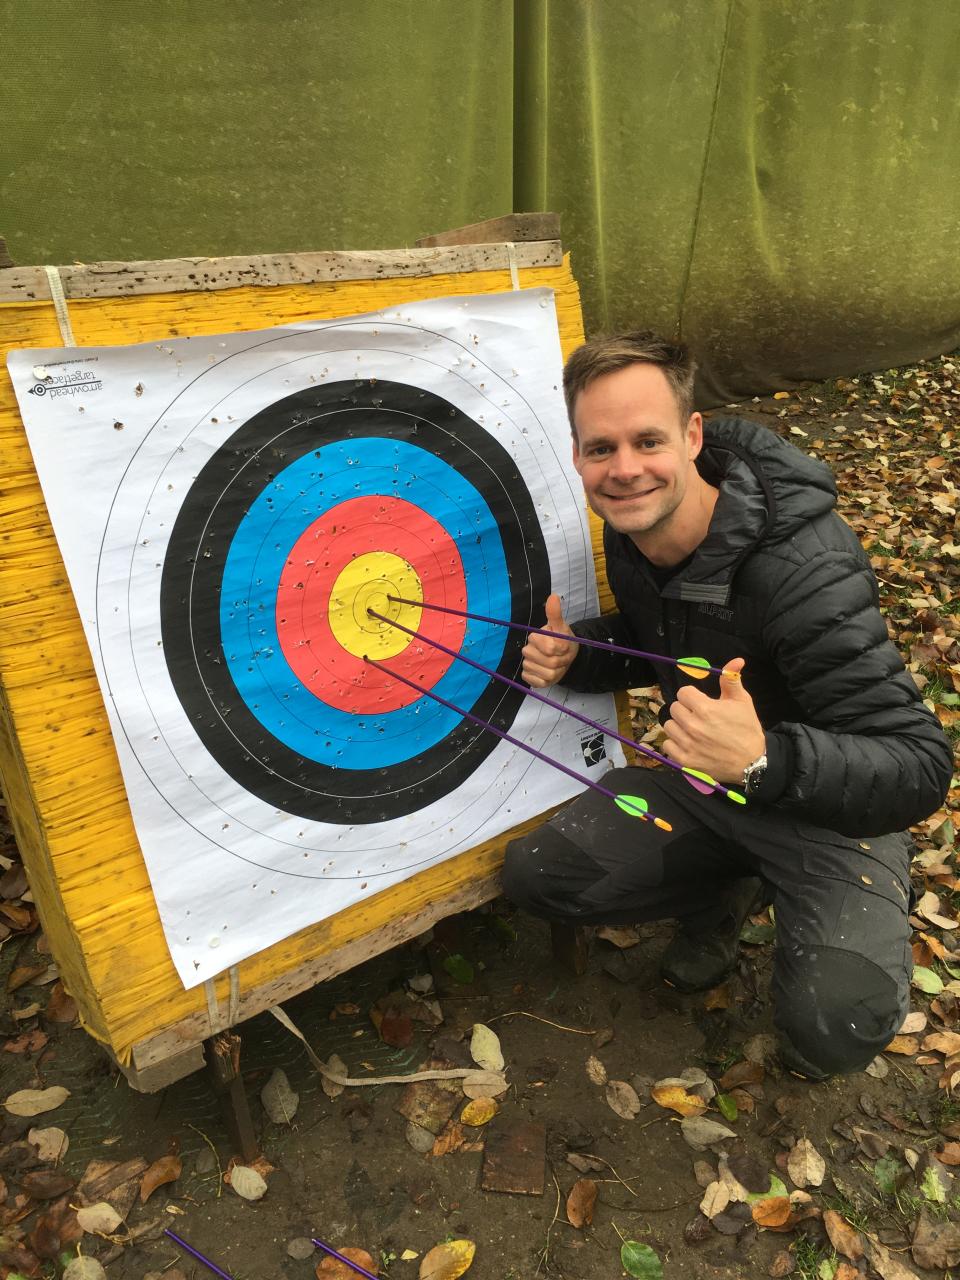 Chris Bone now has time for his outdoor passions, like archery.